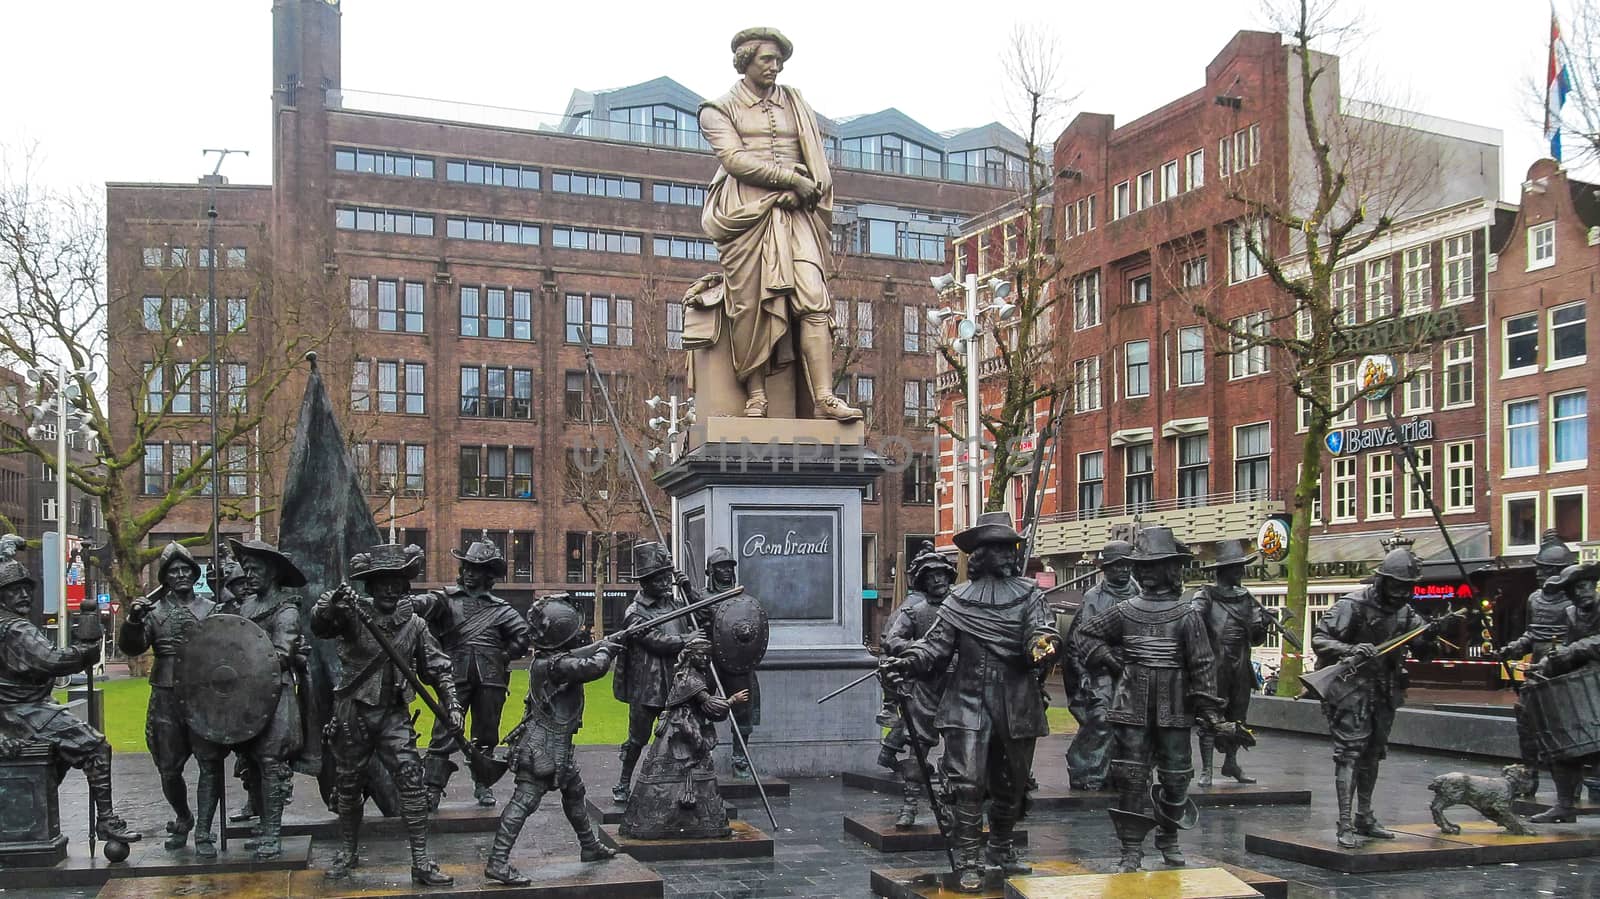 Monument to Dutch artist Rembrandt (Amsterdam, Netherlands) by Grommik